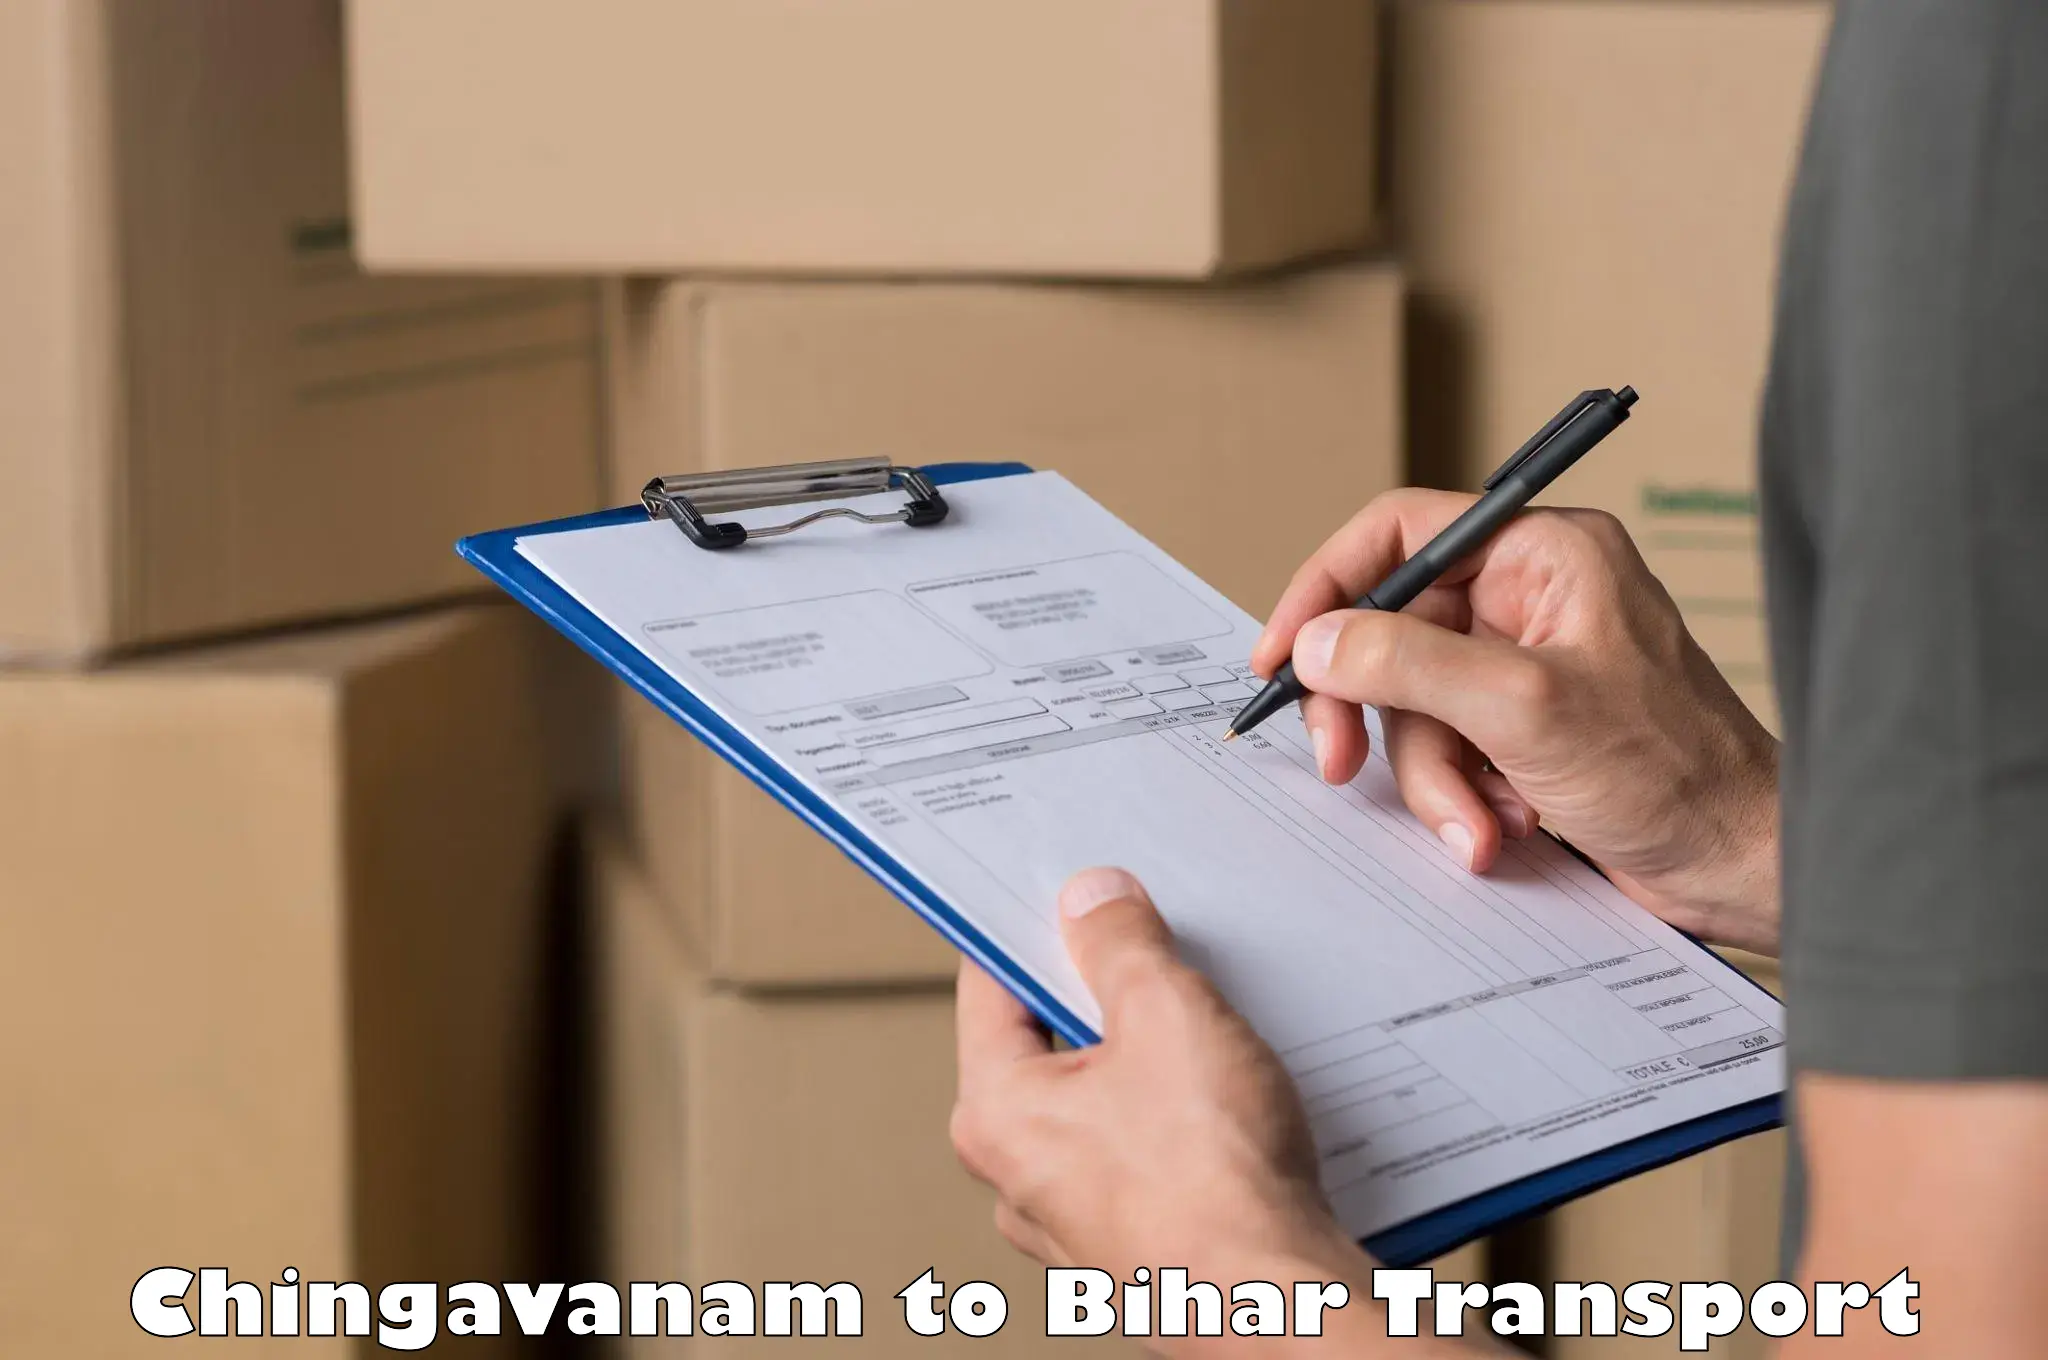 Delivery service Chingavanam to Sultanganj